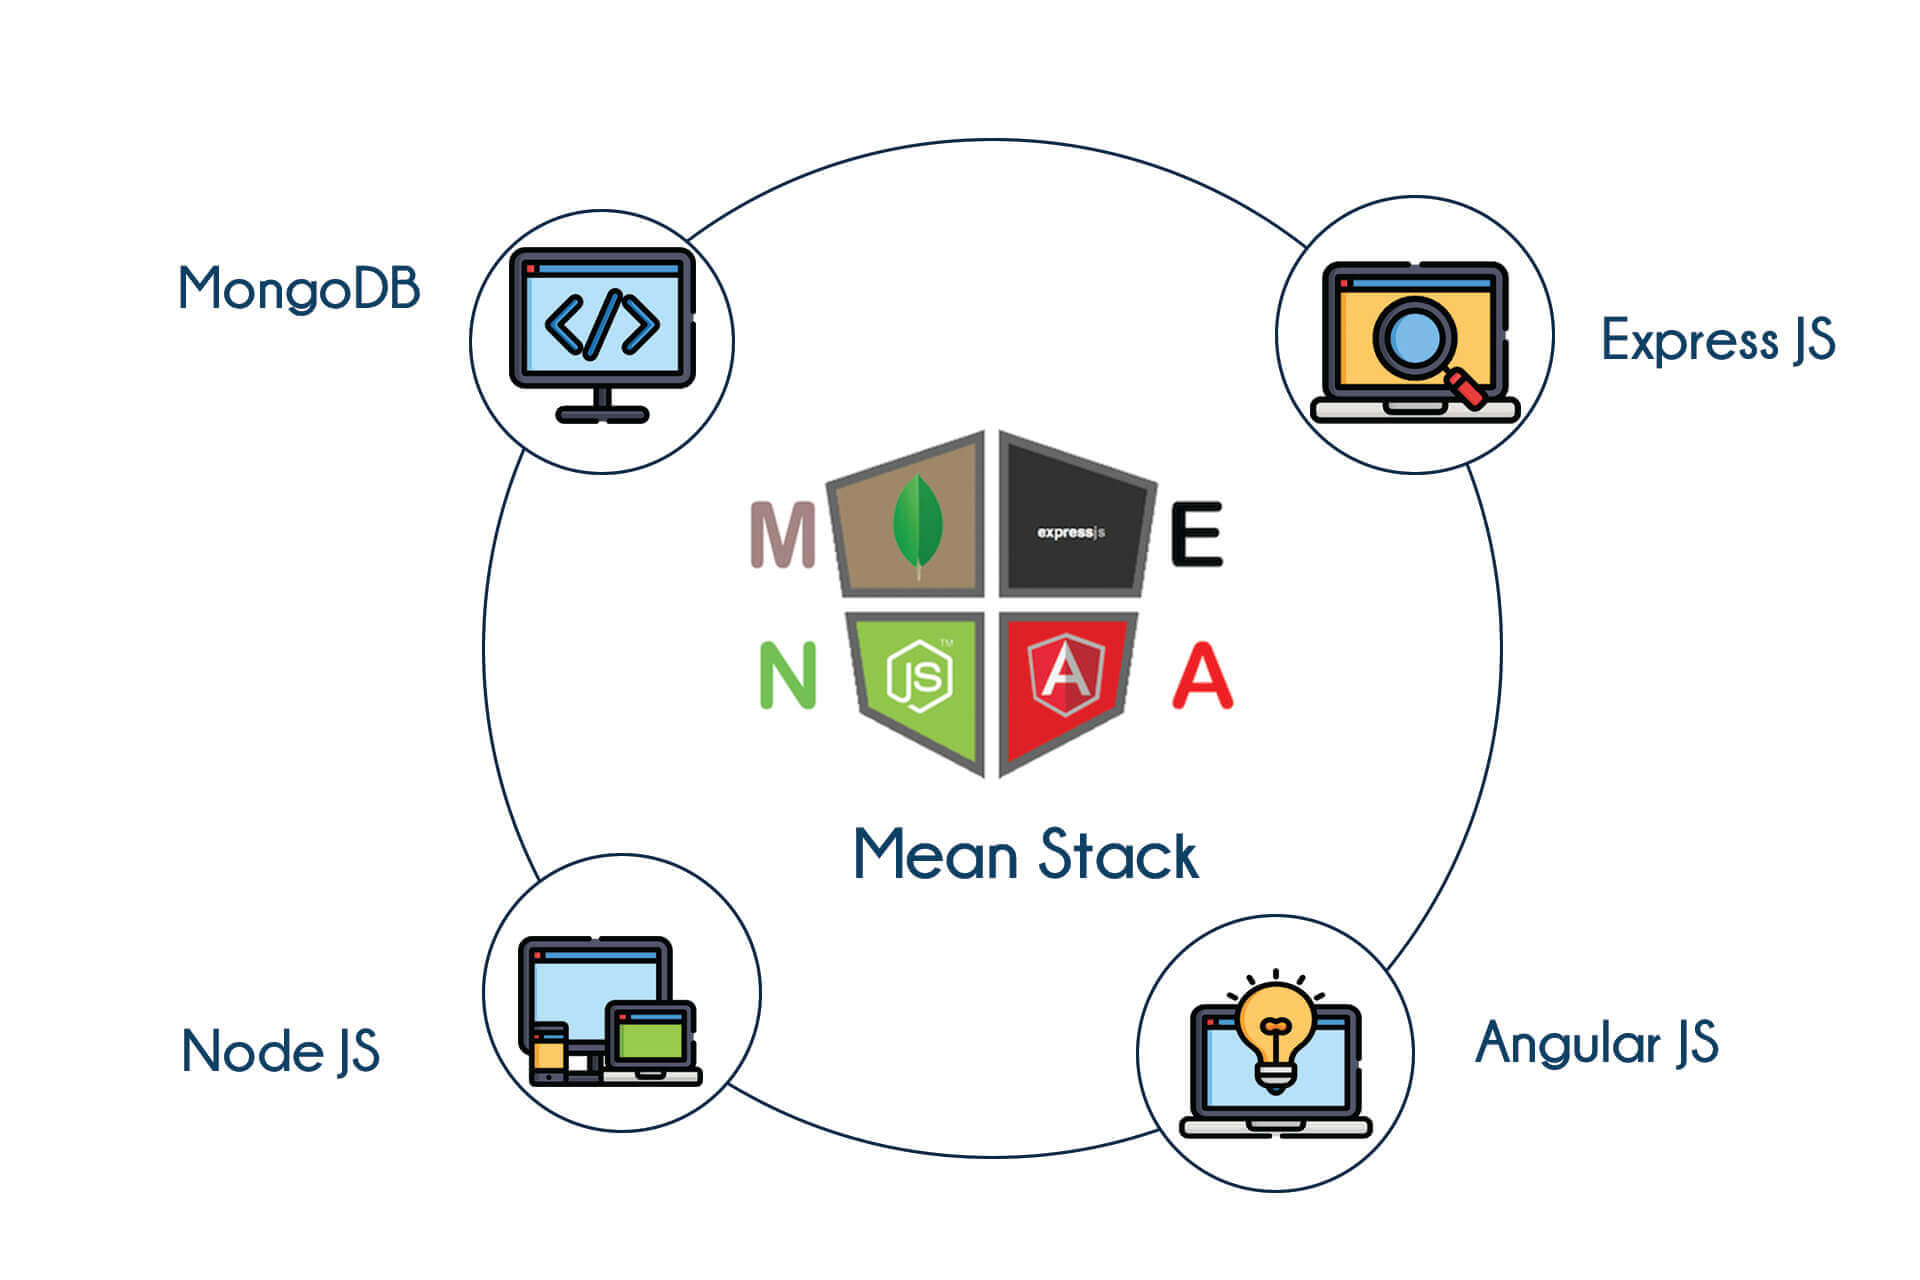 Mean Stack Training in Bangalore